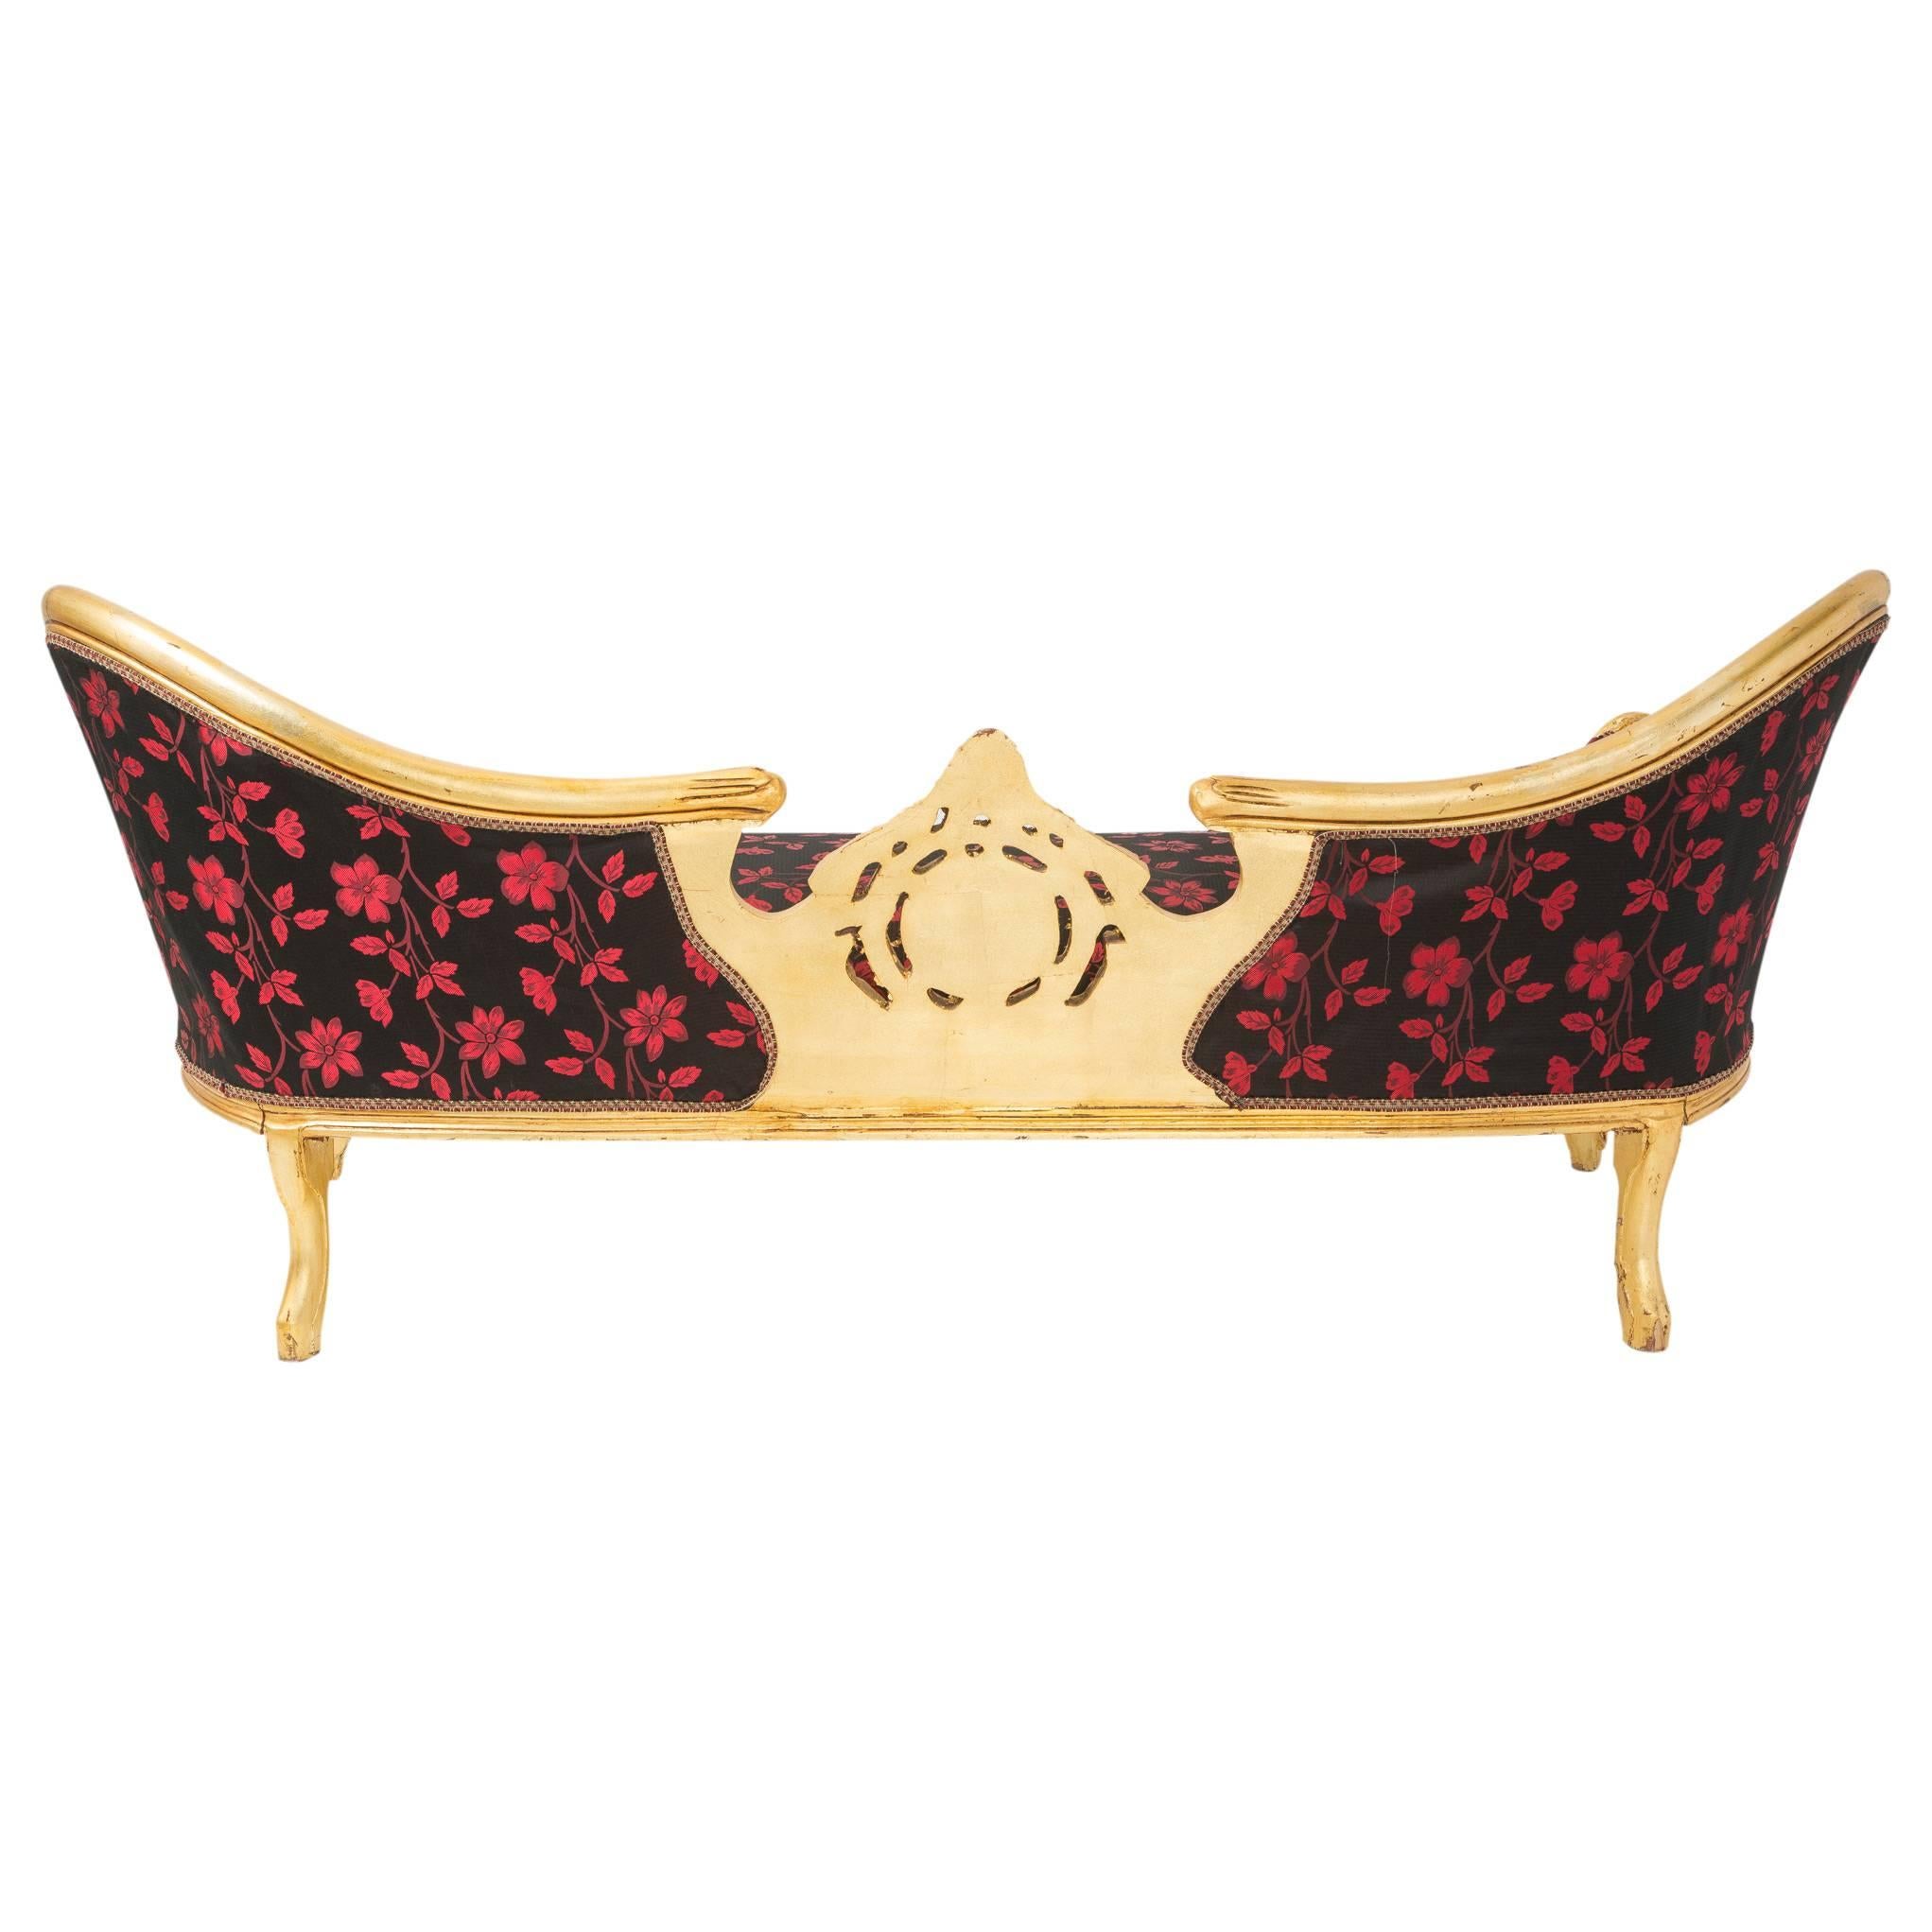 Regency French Style Settee Sofa with Ornate Carved Gold Frame - ON SALE